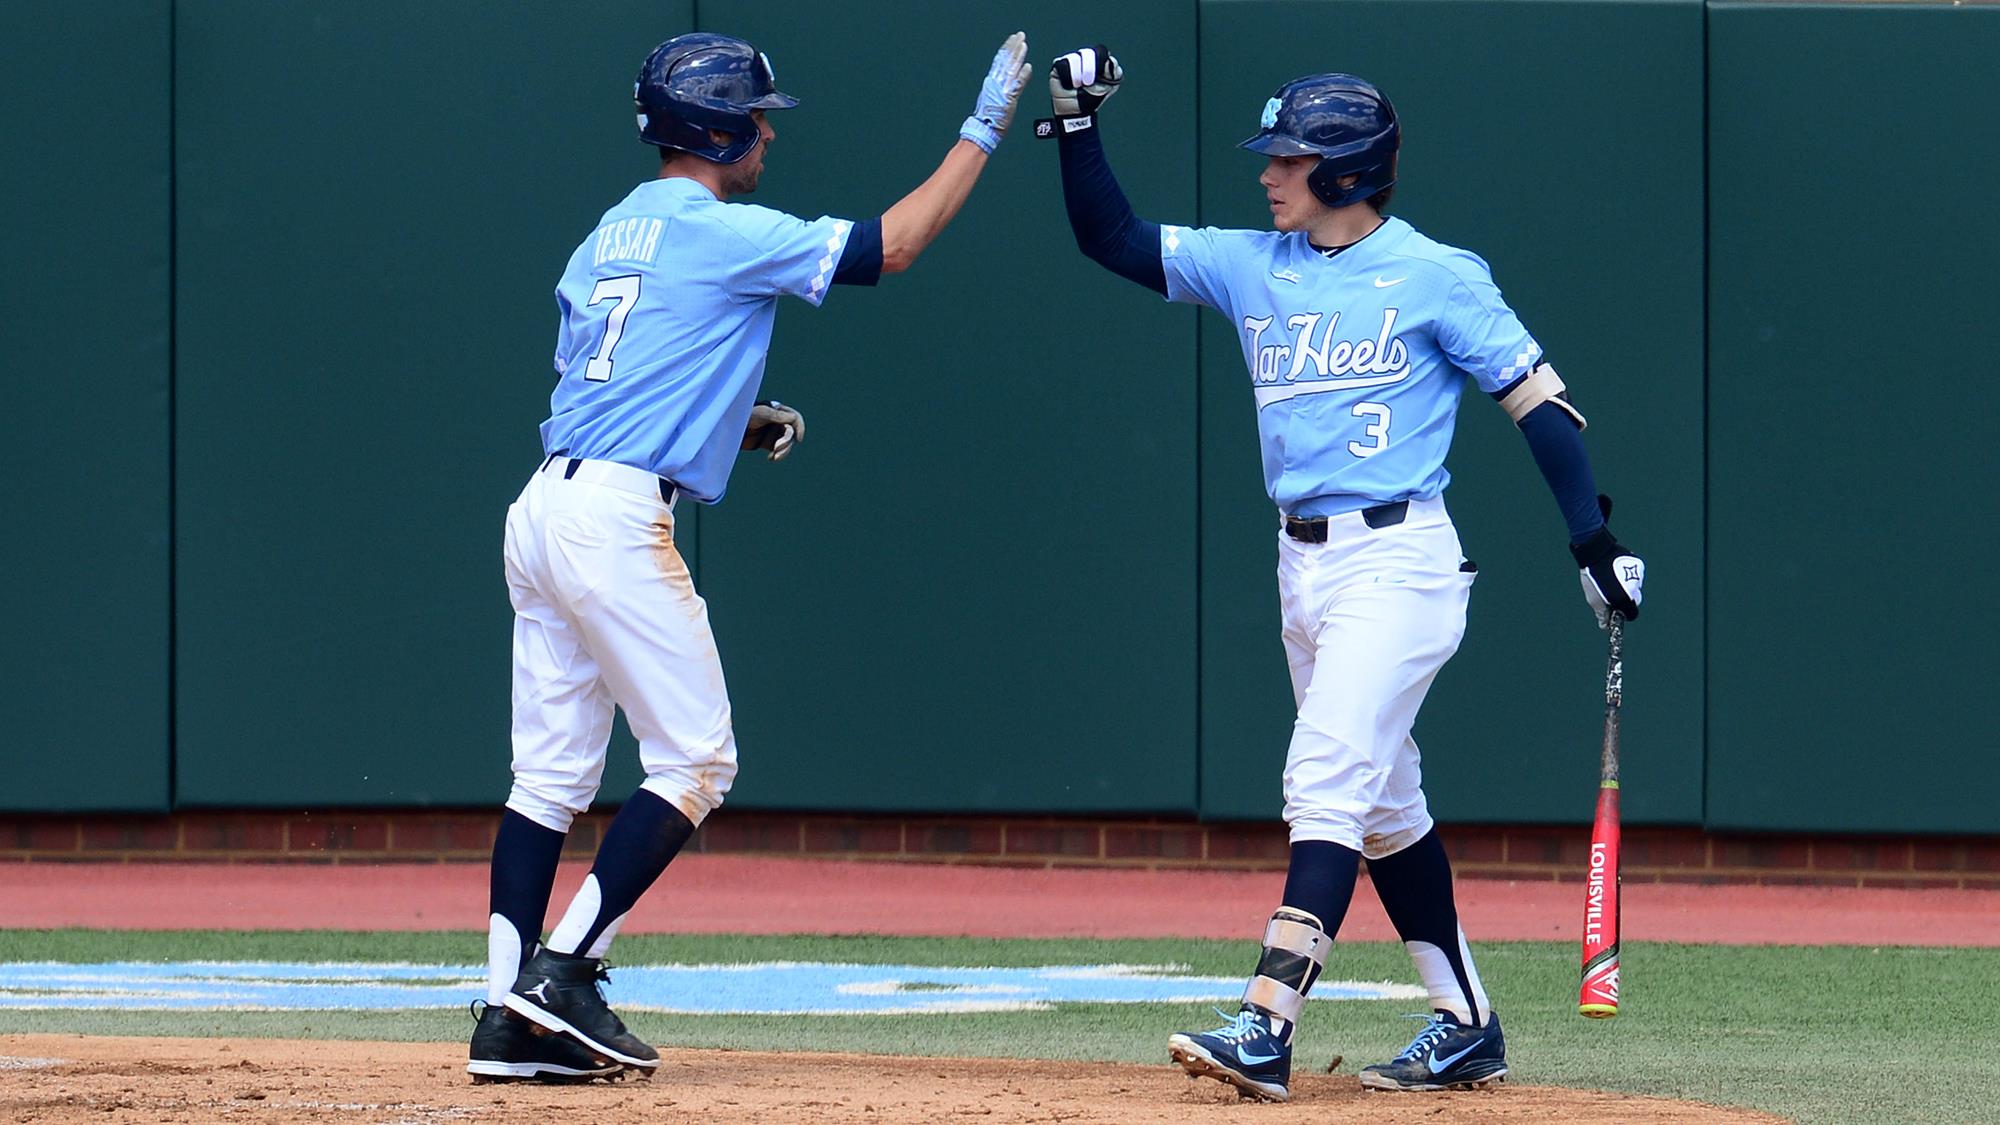 Bats Wake Up Late as UNC Baseball Rolls to 11-3 Victory Over South